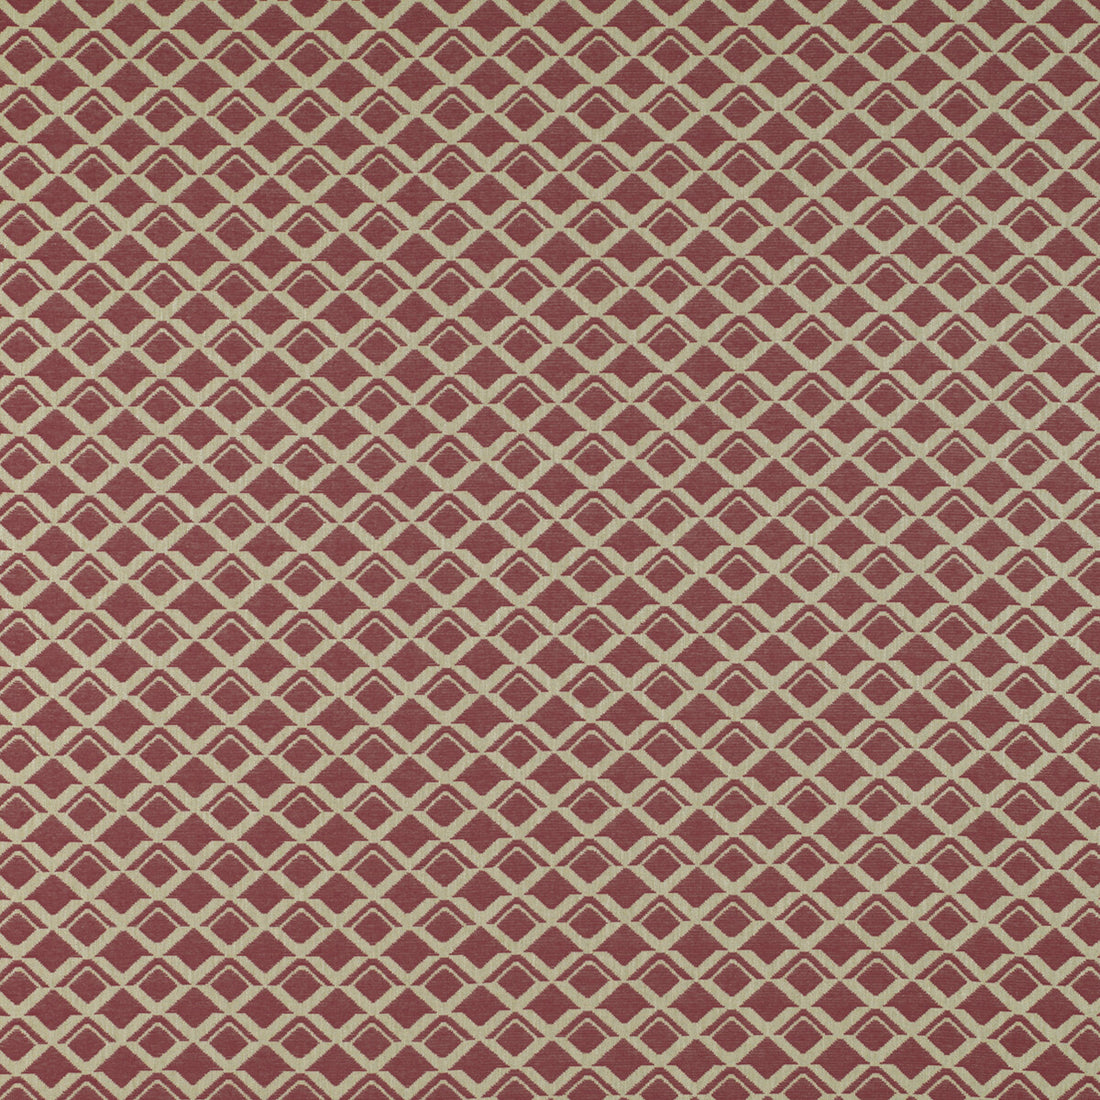 Lodi fabric in rojo color - pattern GDT5324.004.0 - by Gaston y Daniela in the Tierras collection